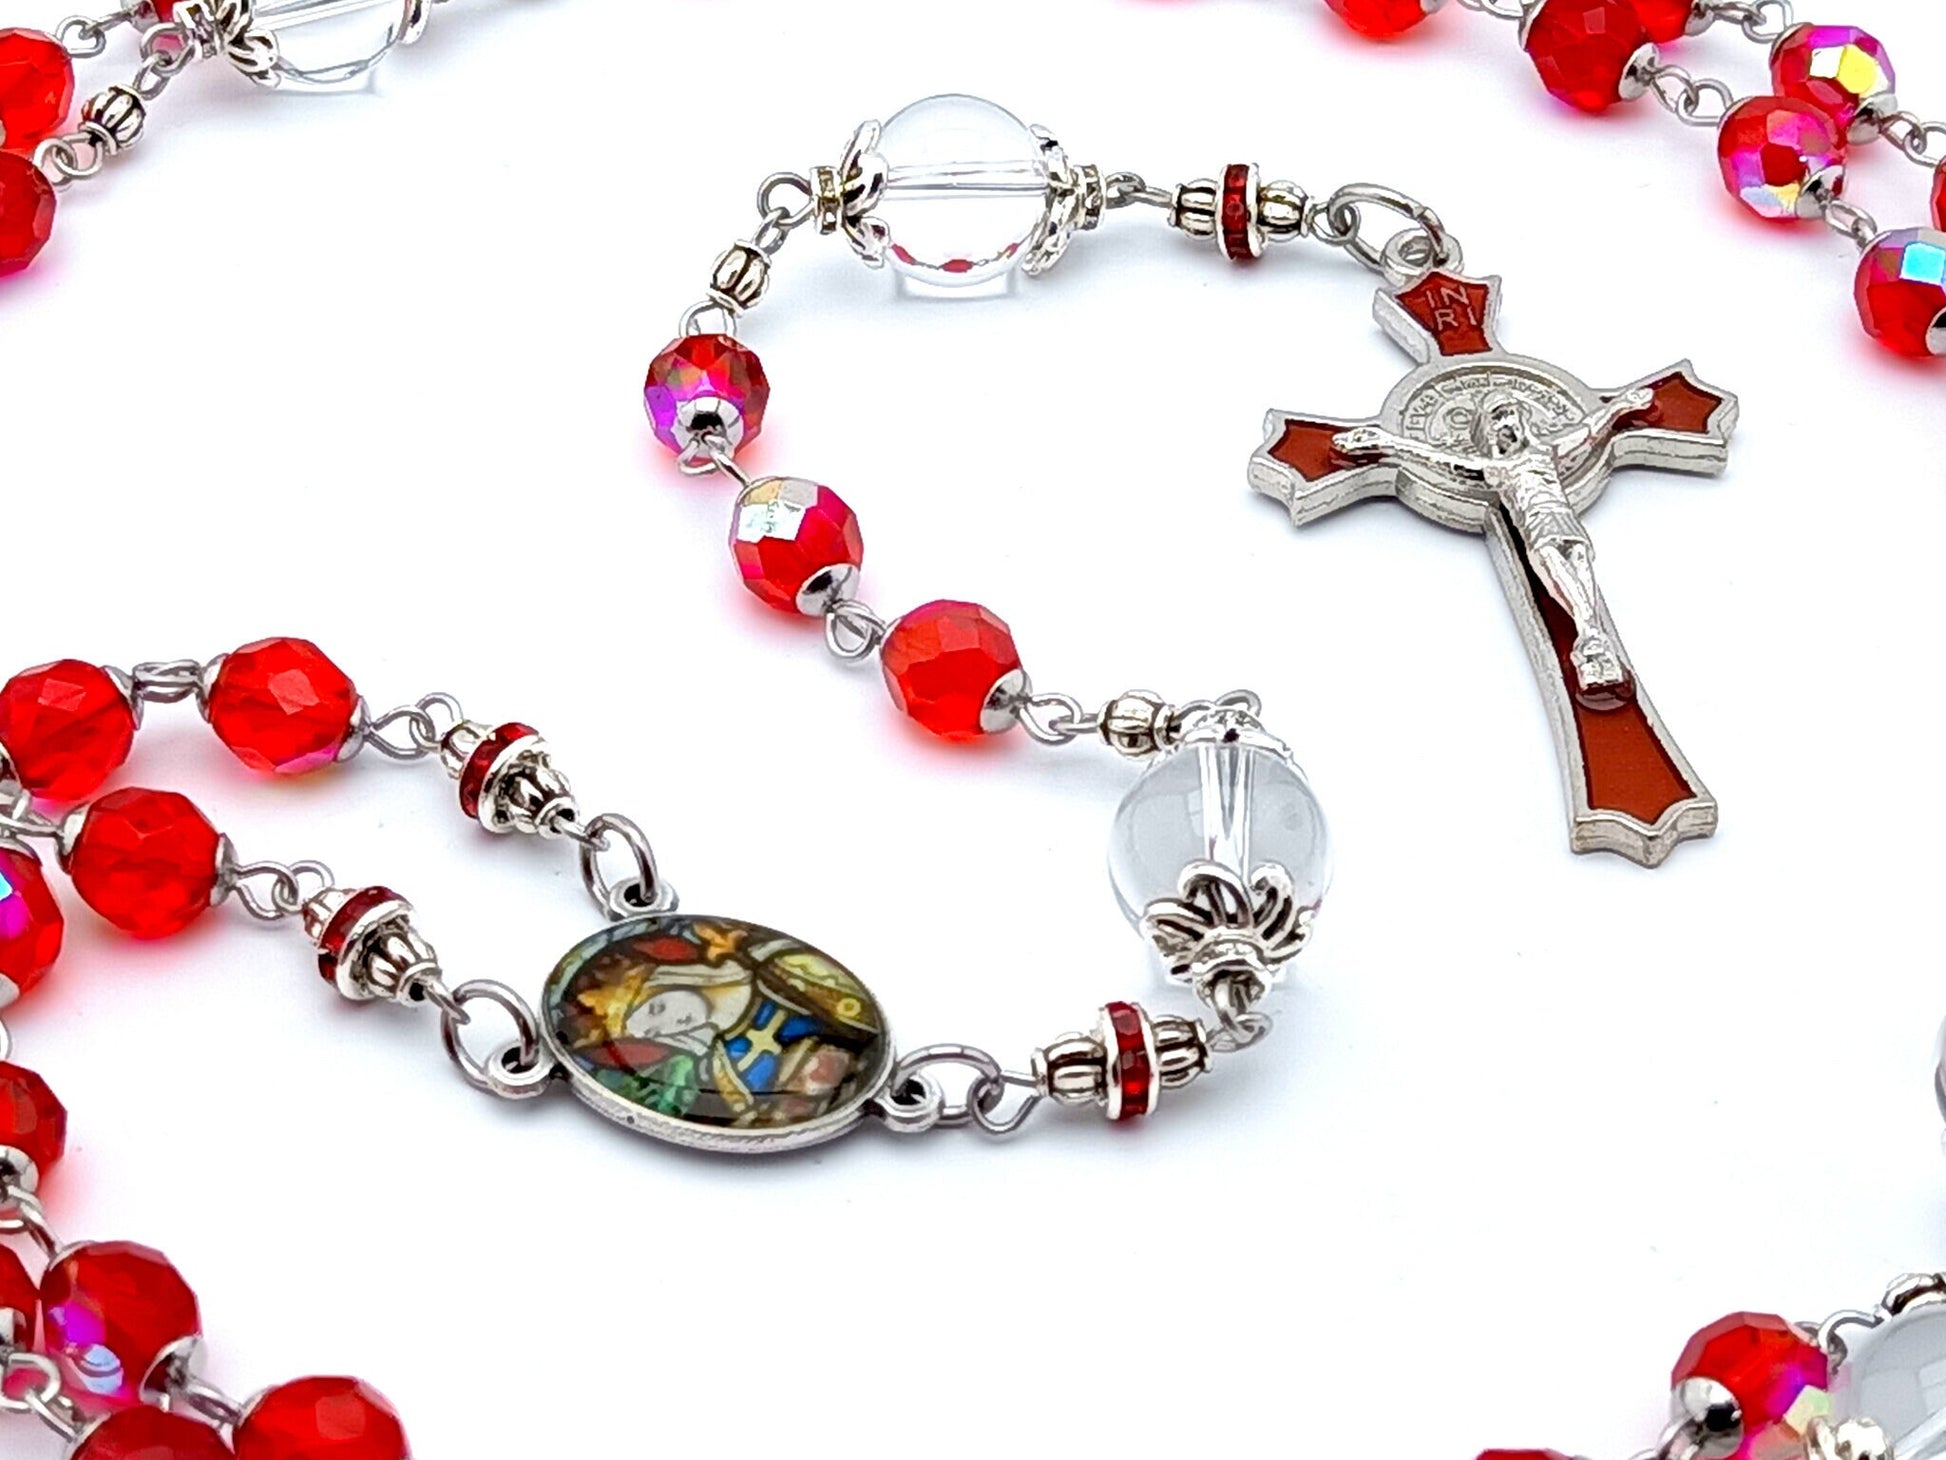 Saint Margaret of Scotland unique rosary beads with red and clear glass beads, red enamel Saint Benedict crucifix and silver picture centre medal.